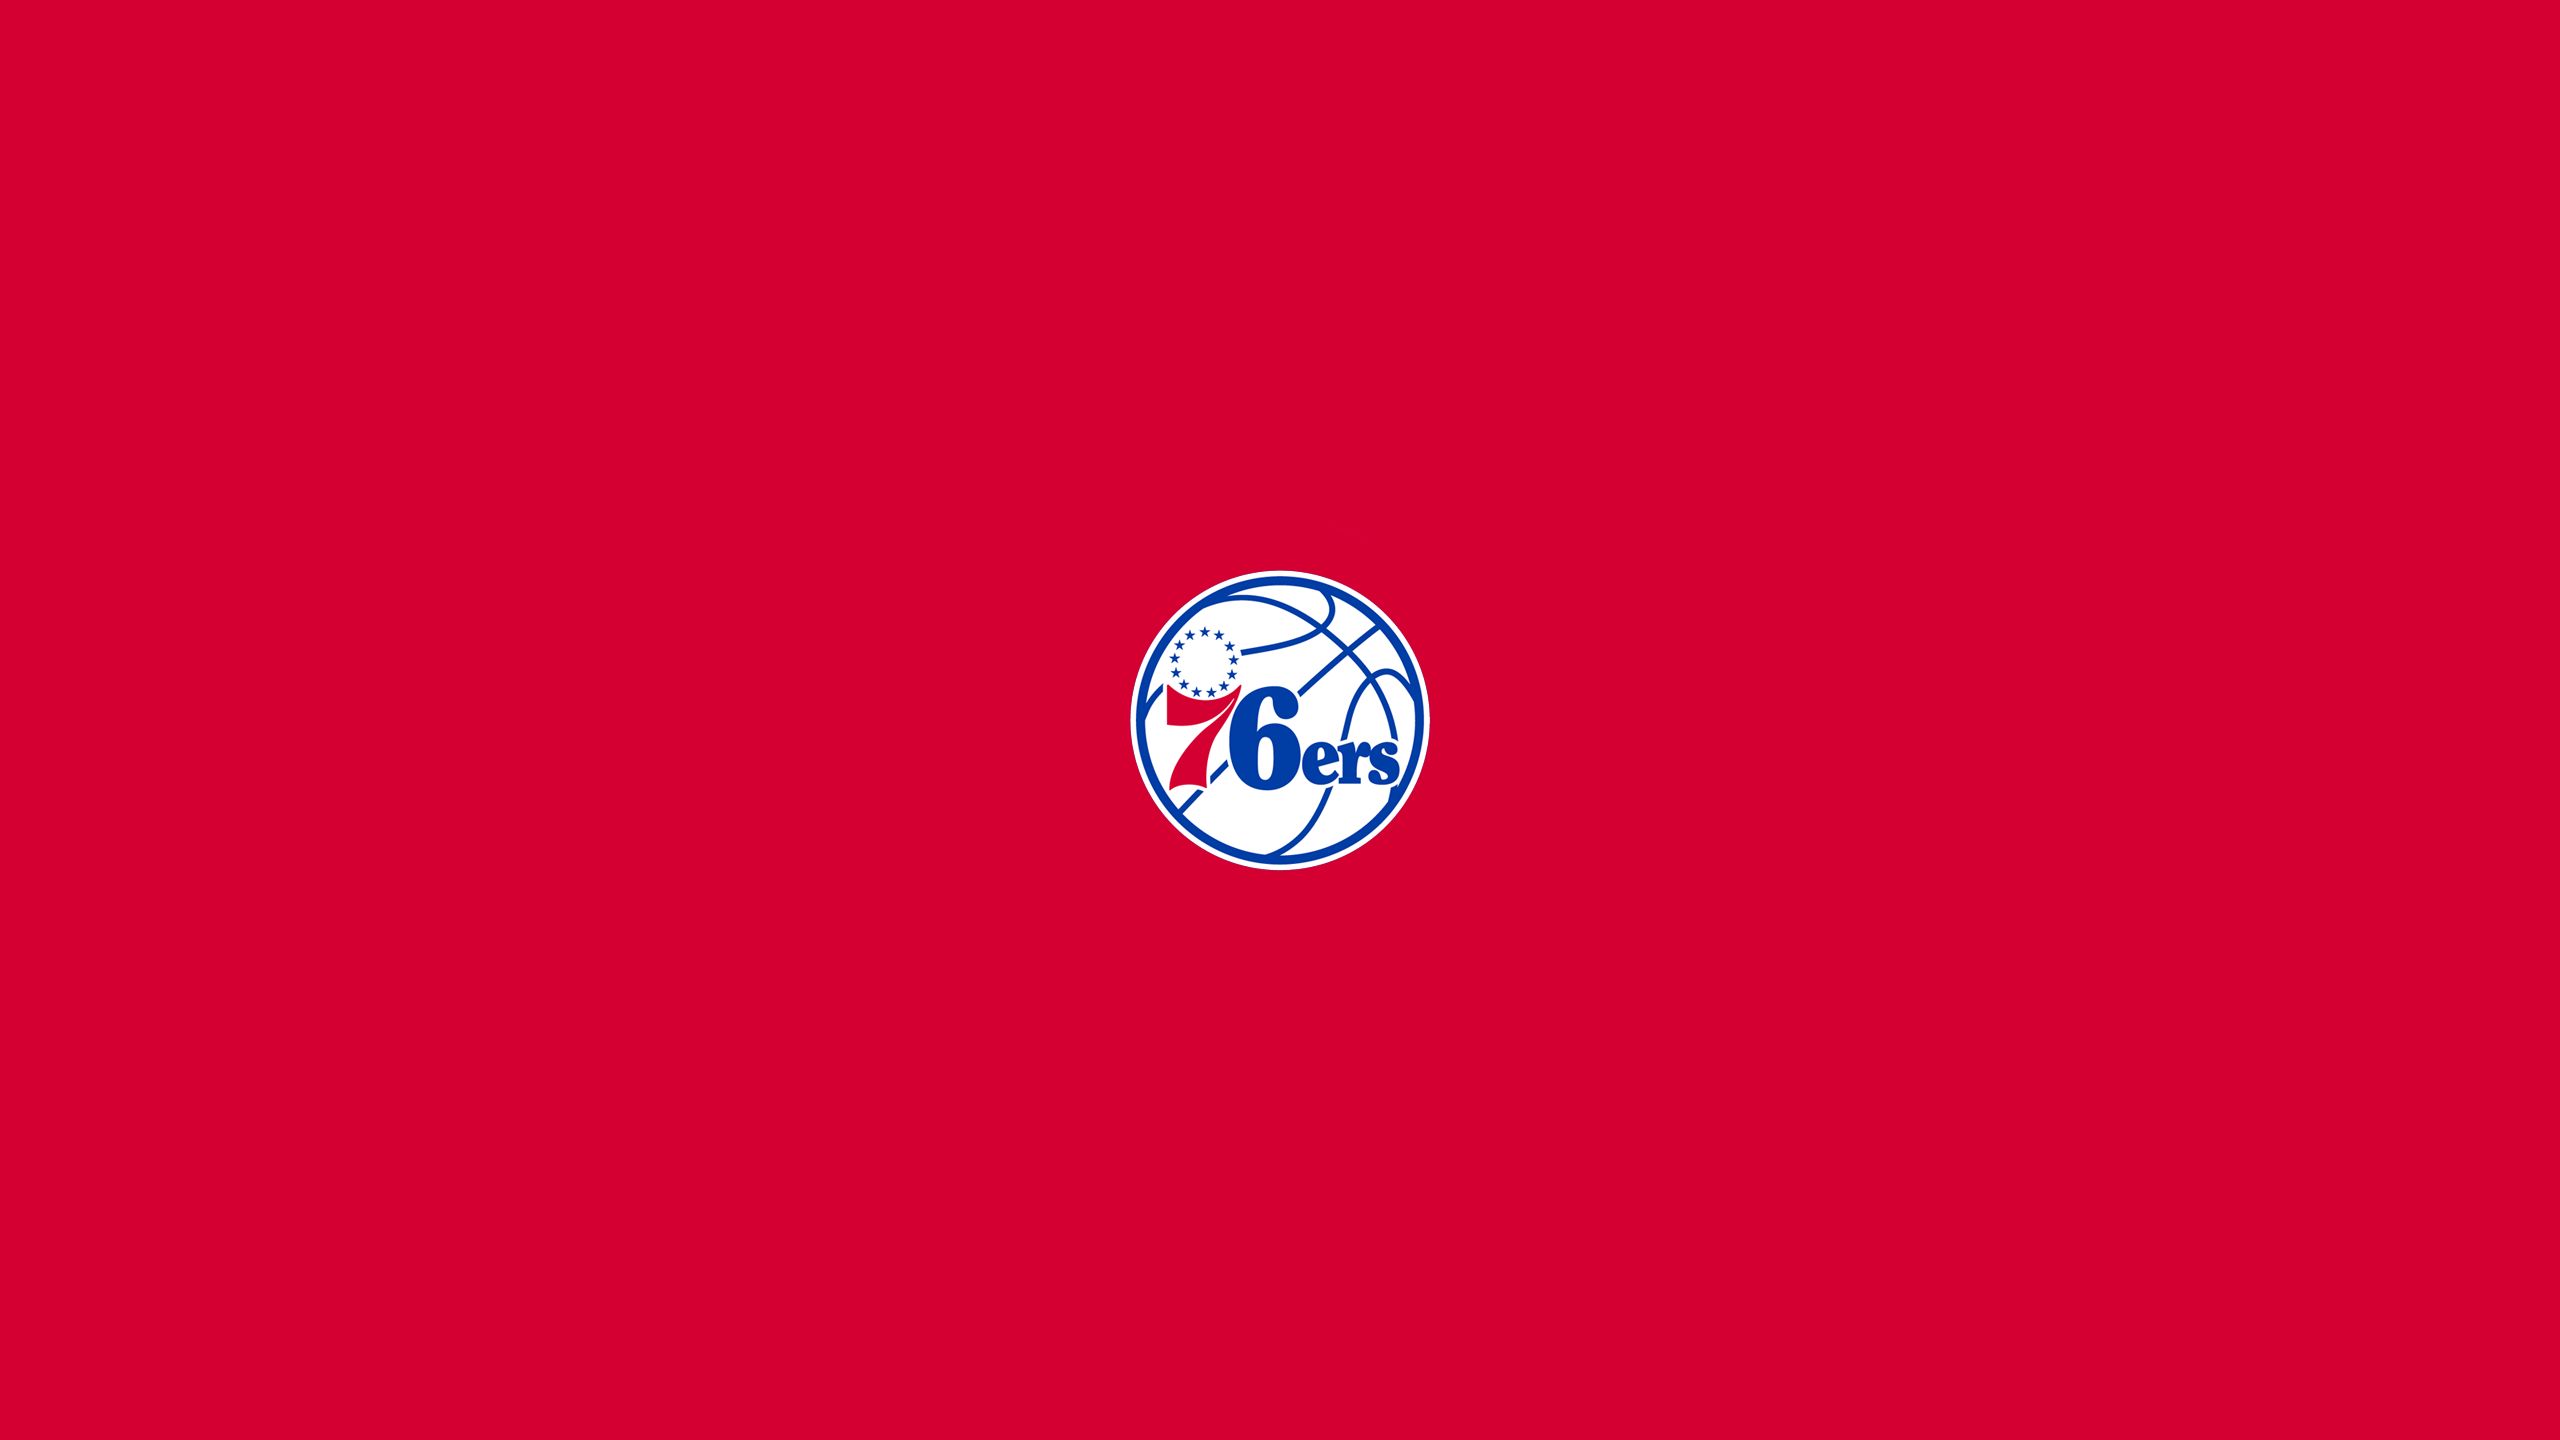 76ers Images  Photos videos logos illustrations and branding on Behance